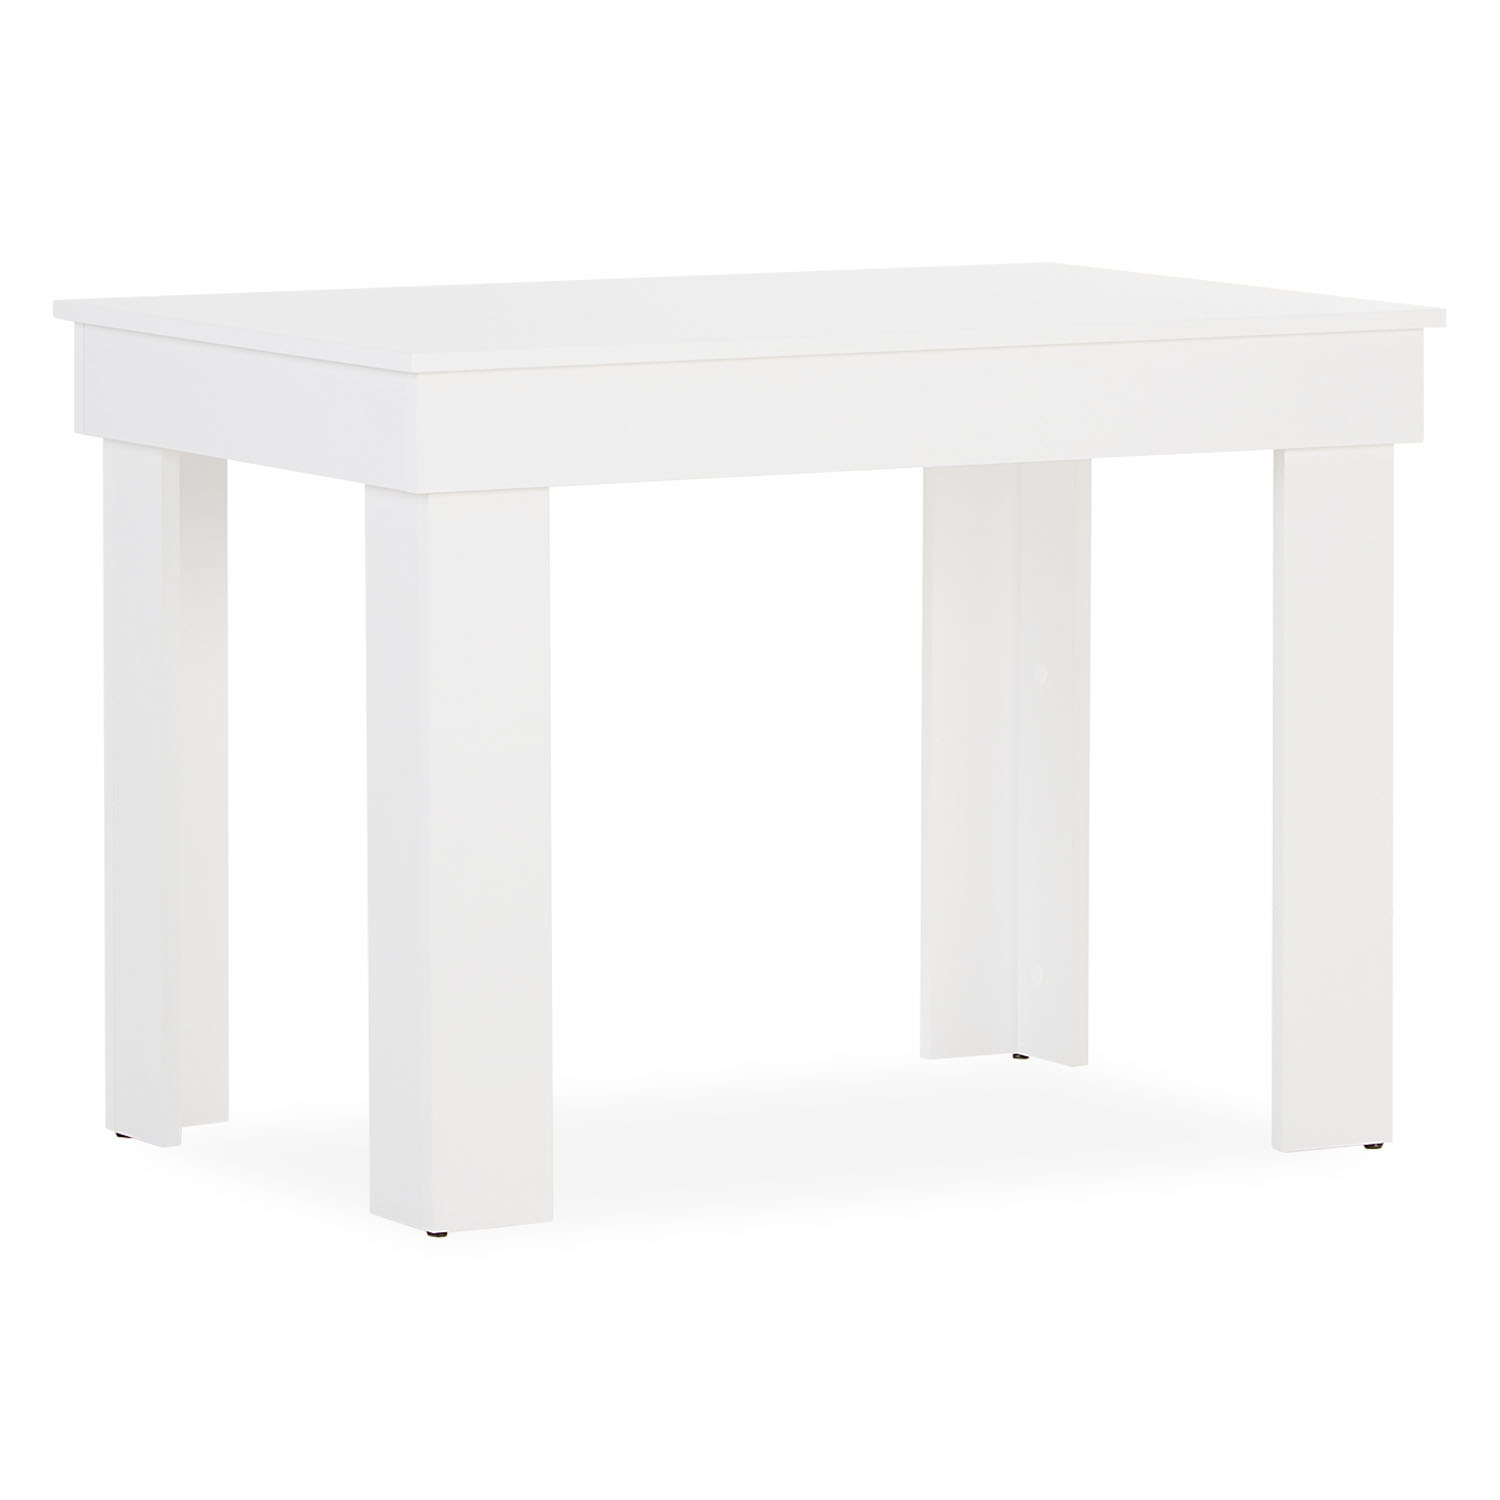 Modern Dining Table Kitchen Table Wooden Table 90x60 cm White 2 Seater Living Room